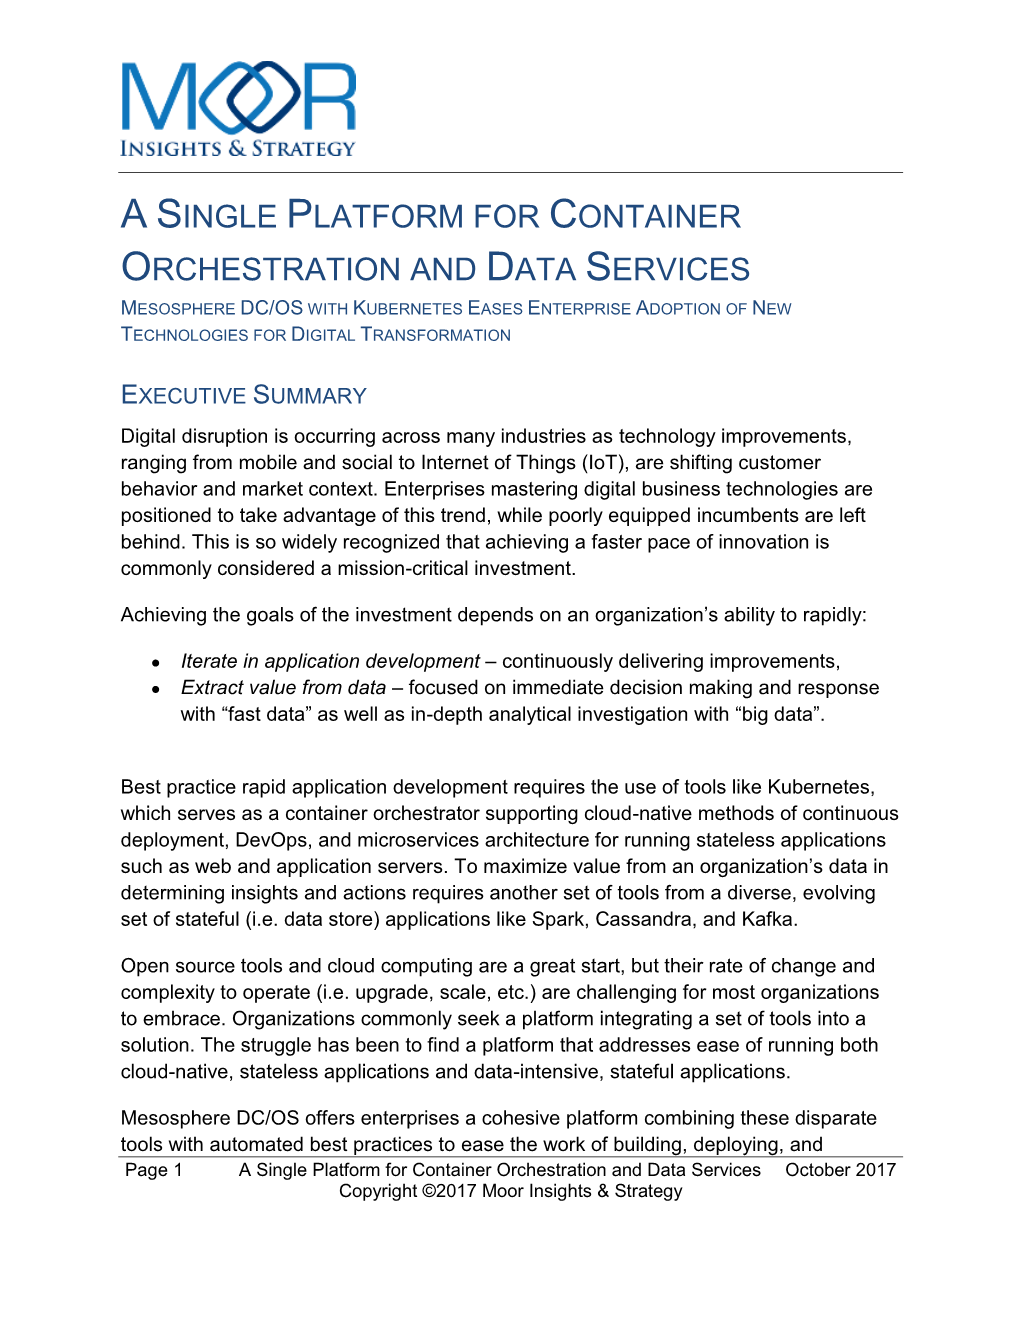 A Single Platform for Container Orchestration and Data Services